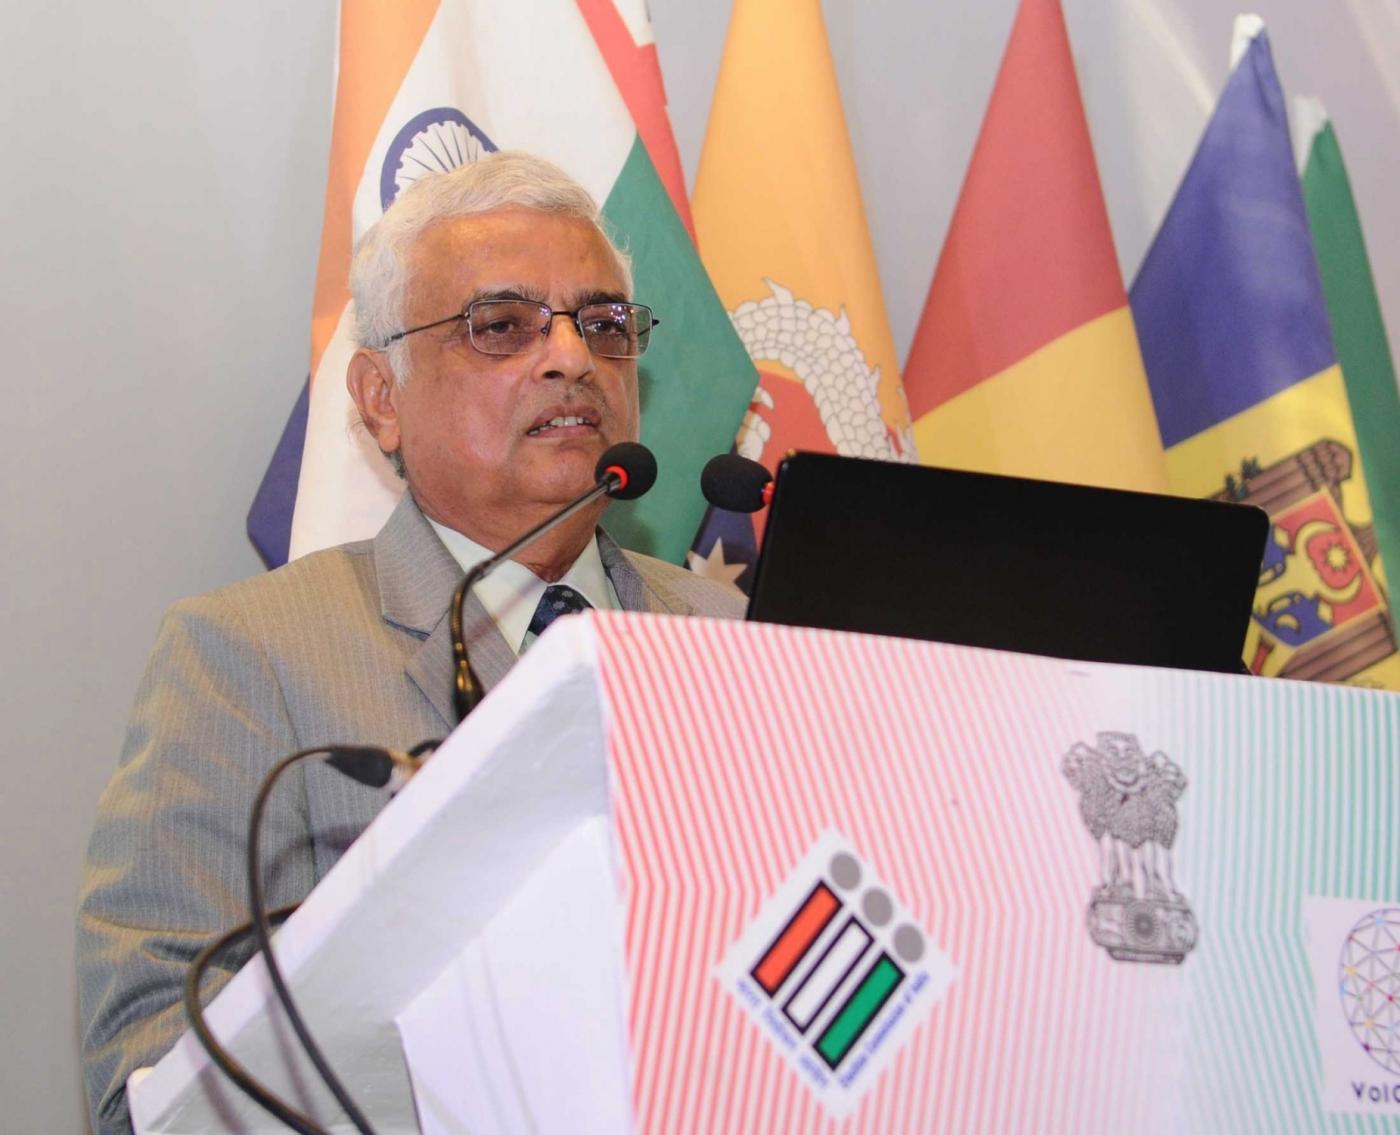 New Delhi: Chief Election Commissioner O.P. Rawat addresses at the International Conference on 'Inclusion of Persons with Disabilities in Electoral Process' in New Delhi on Jan 24, 2018. (Photo: IANS/PIB) by .